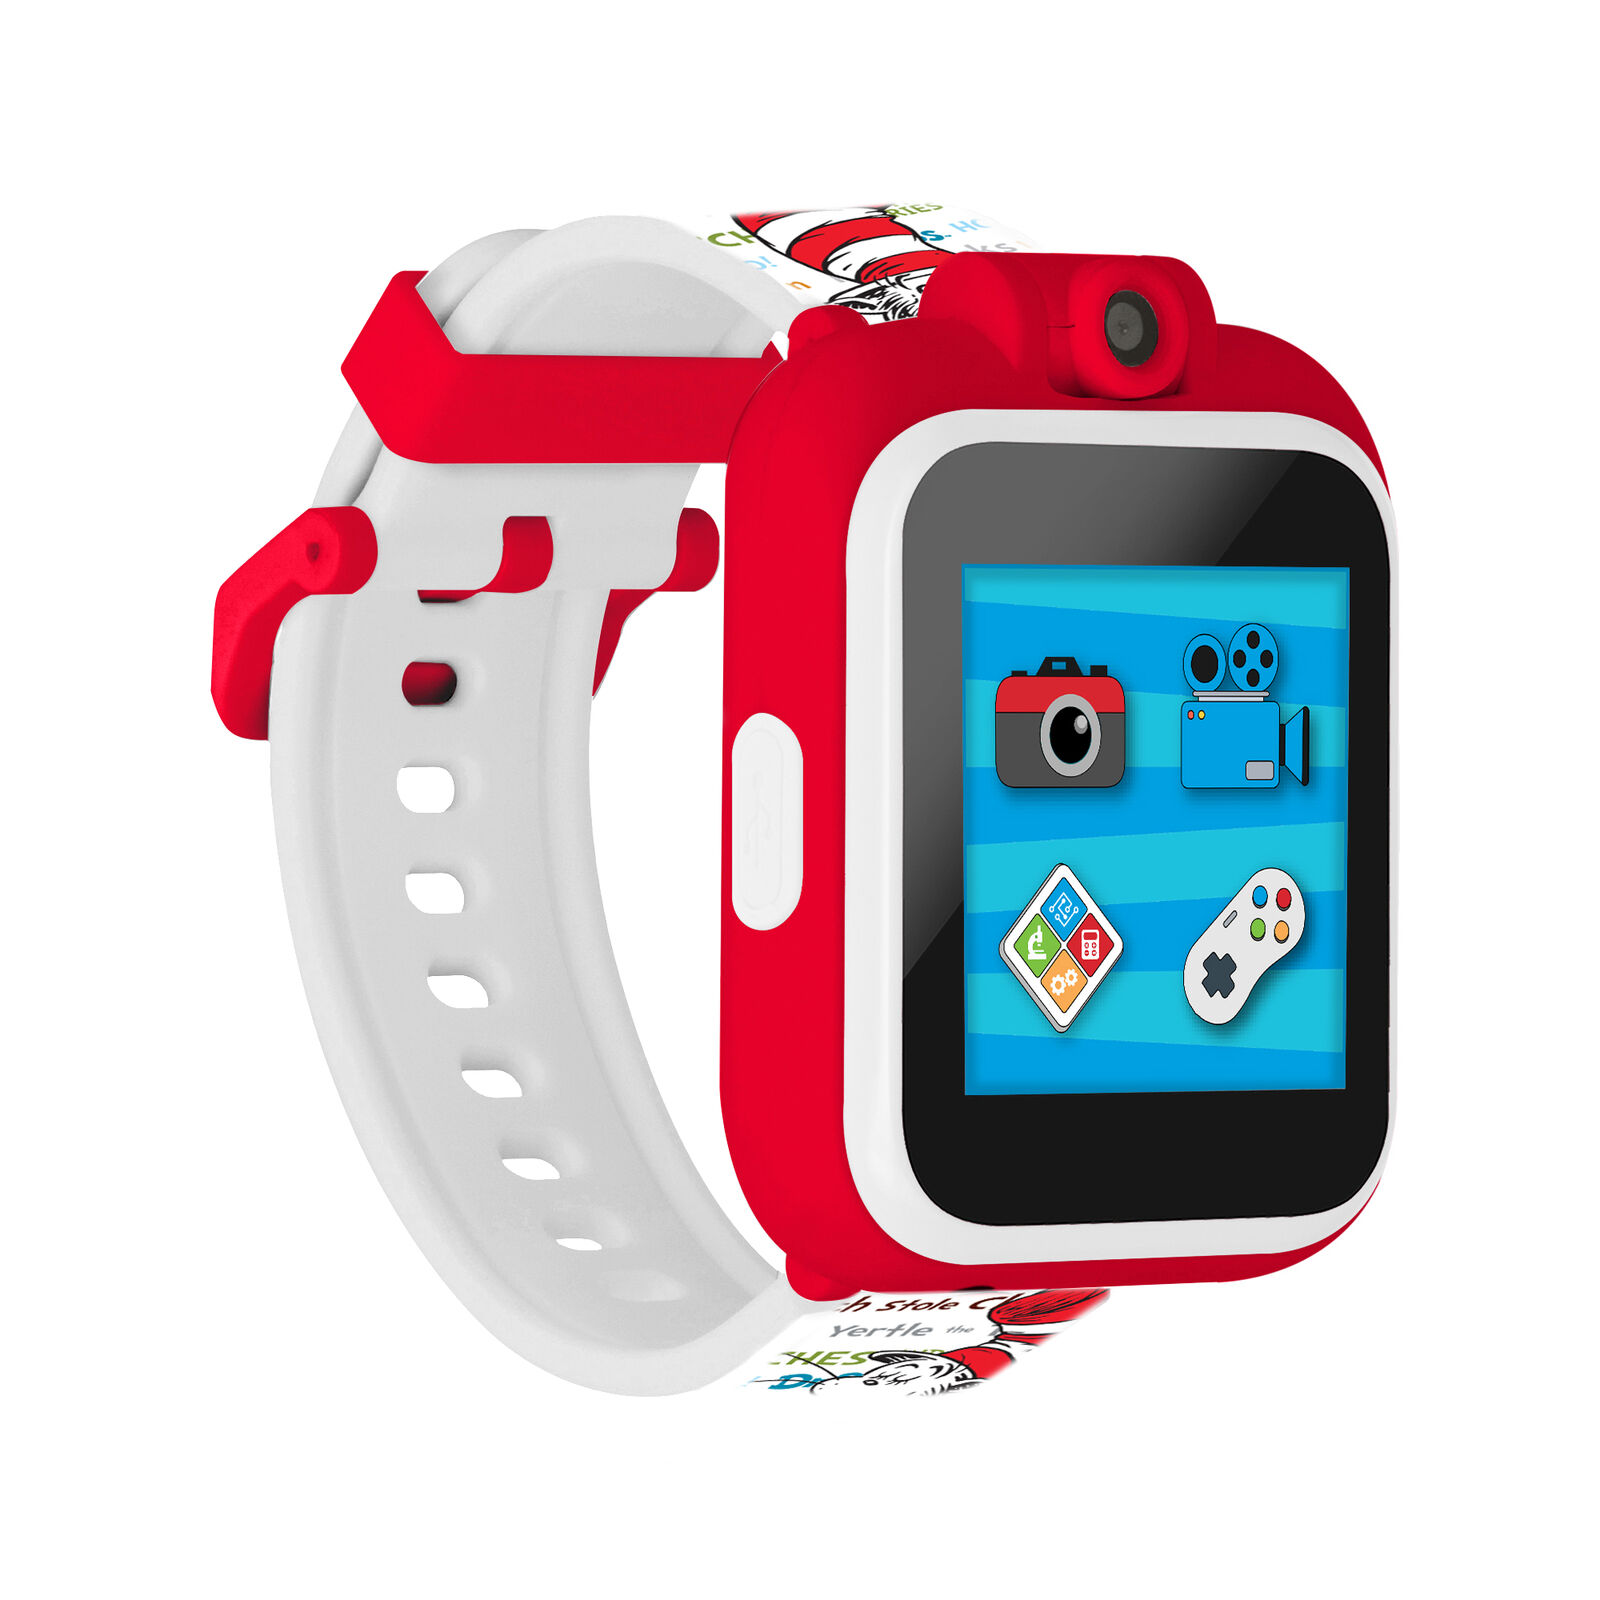 Playzoom 2 Dr.seuss Educational Smartwatch For Kids: White Cat In The Hat Print